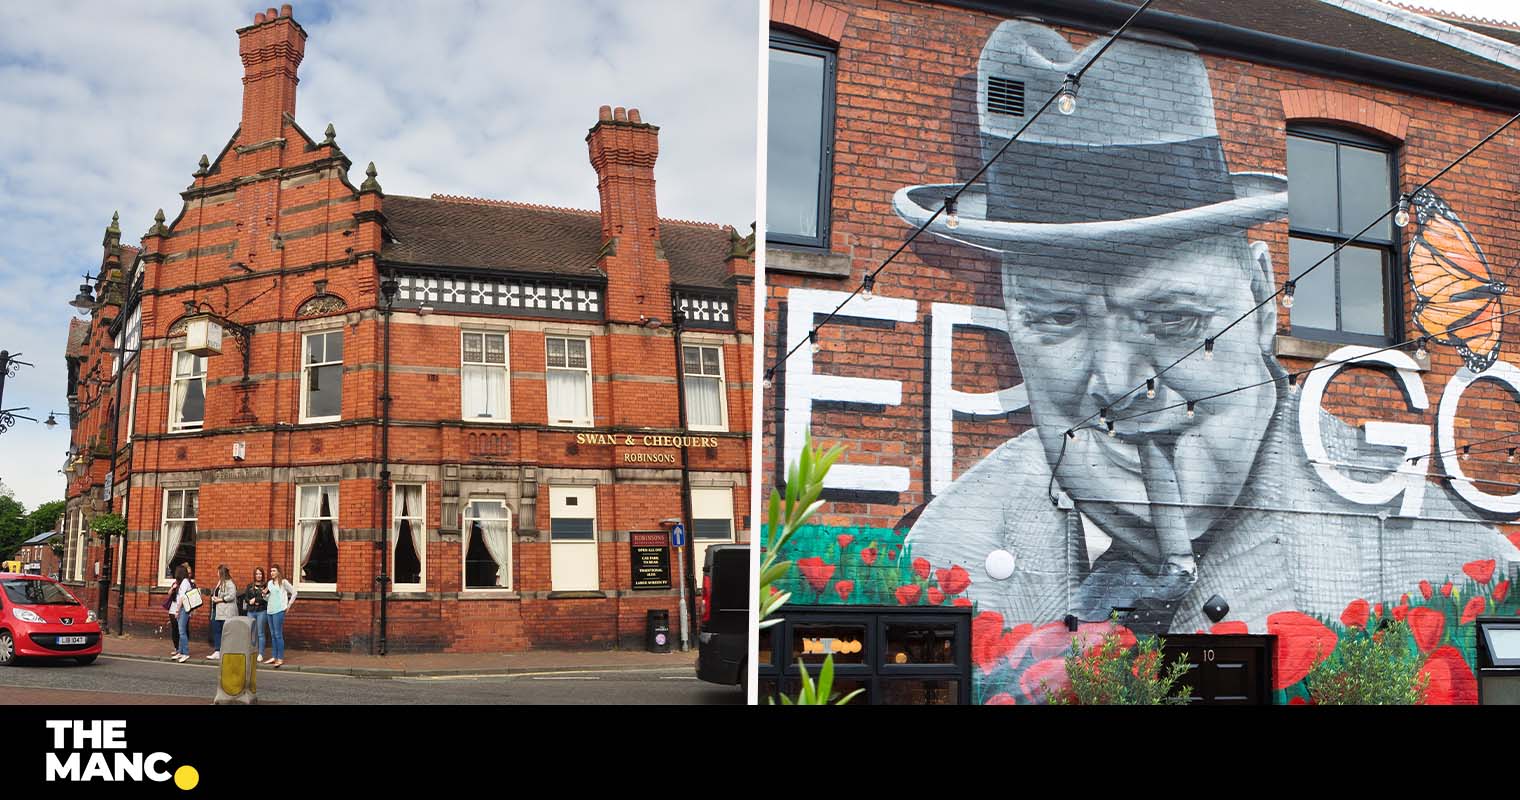 Historic 130-year-old pub plastered with controversial Winston Churchill mural